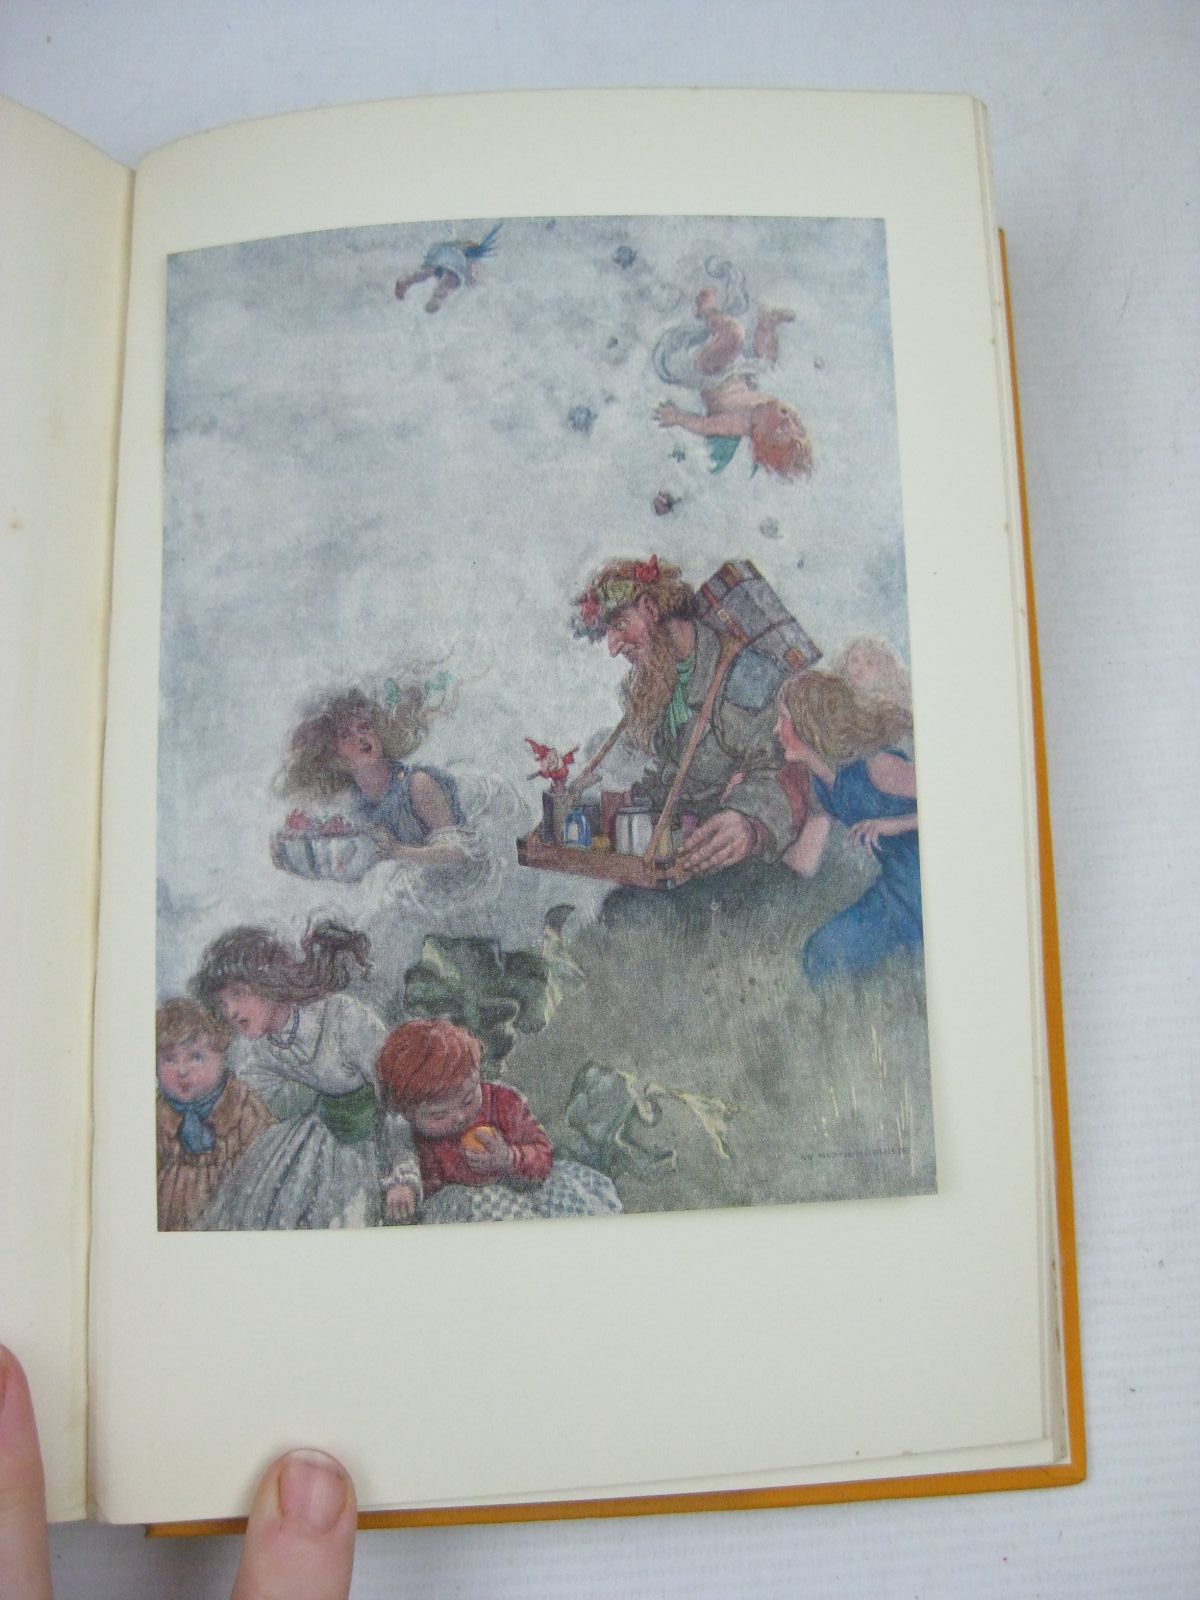 Photo of BILL THE MINDER written by Robinson, W. Heath illustrated by Robinson, W. Heath published by Hodder & Stoughton (STOCK CODE: 1506042)  for sale by Stella & Rose's Books